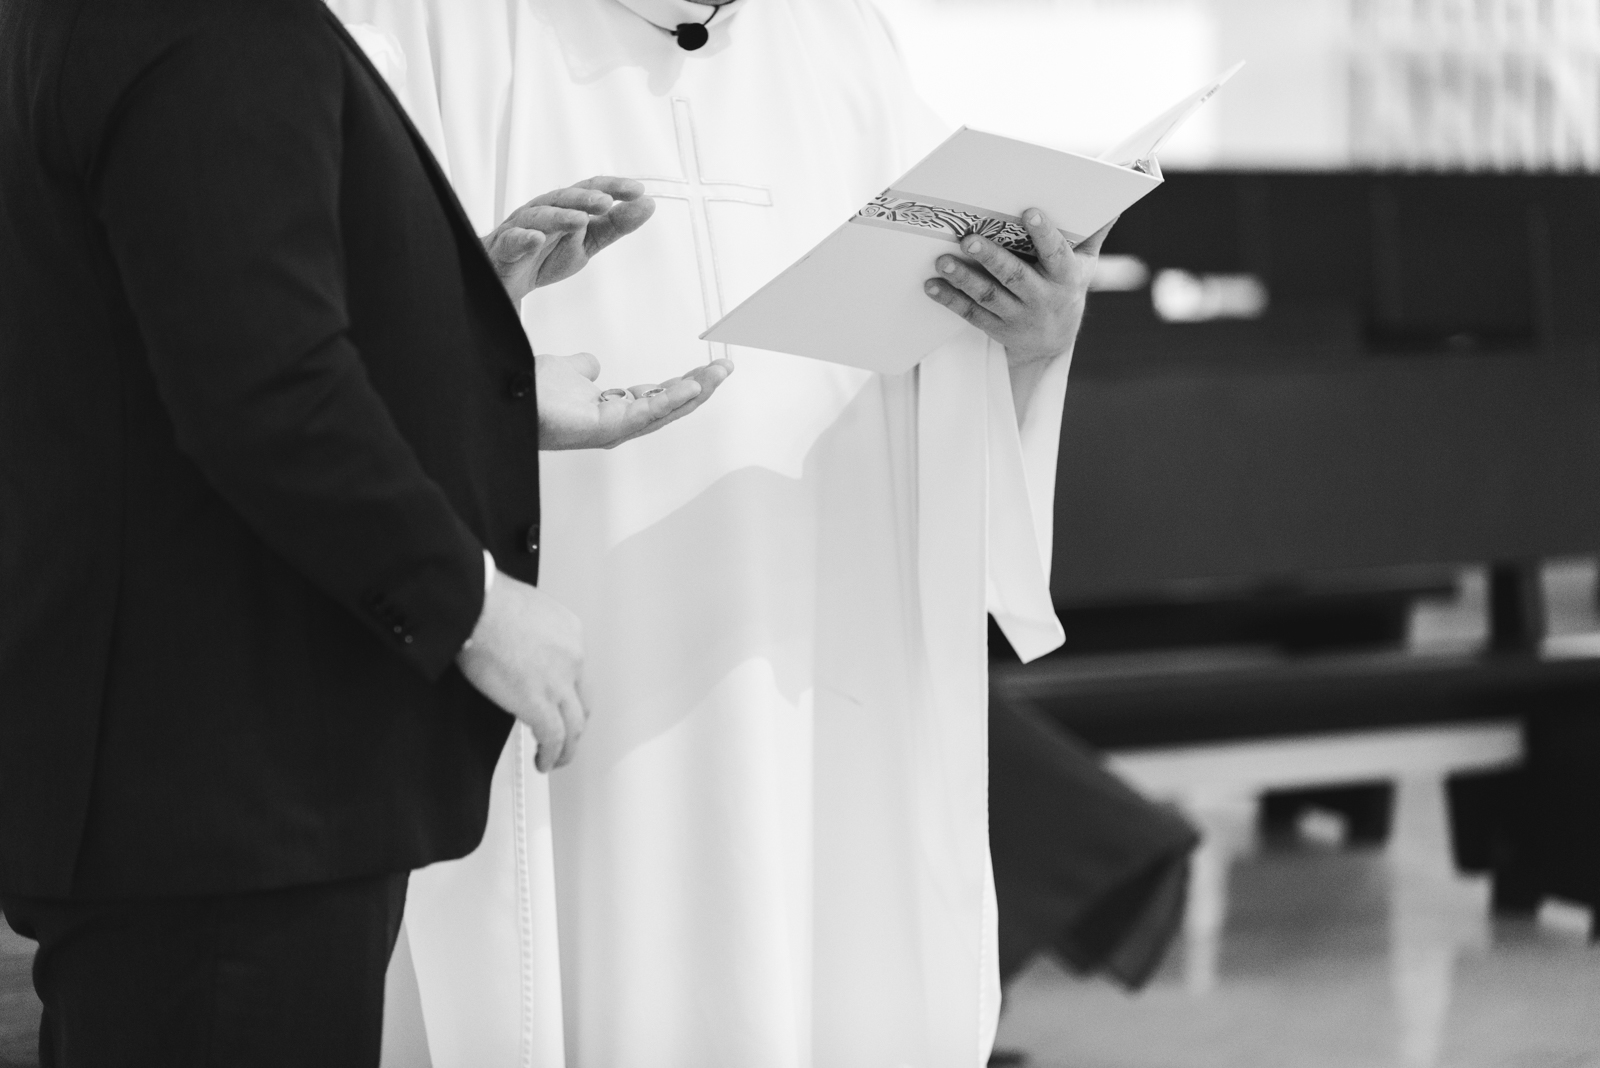 priest blessing the wedding bands during wedding ceremony at St Basil's Church